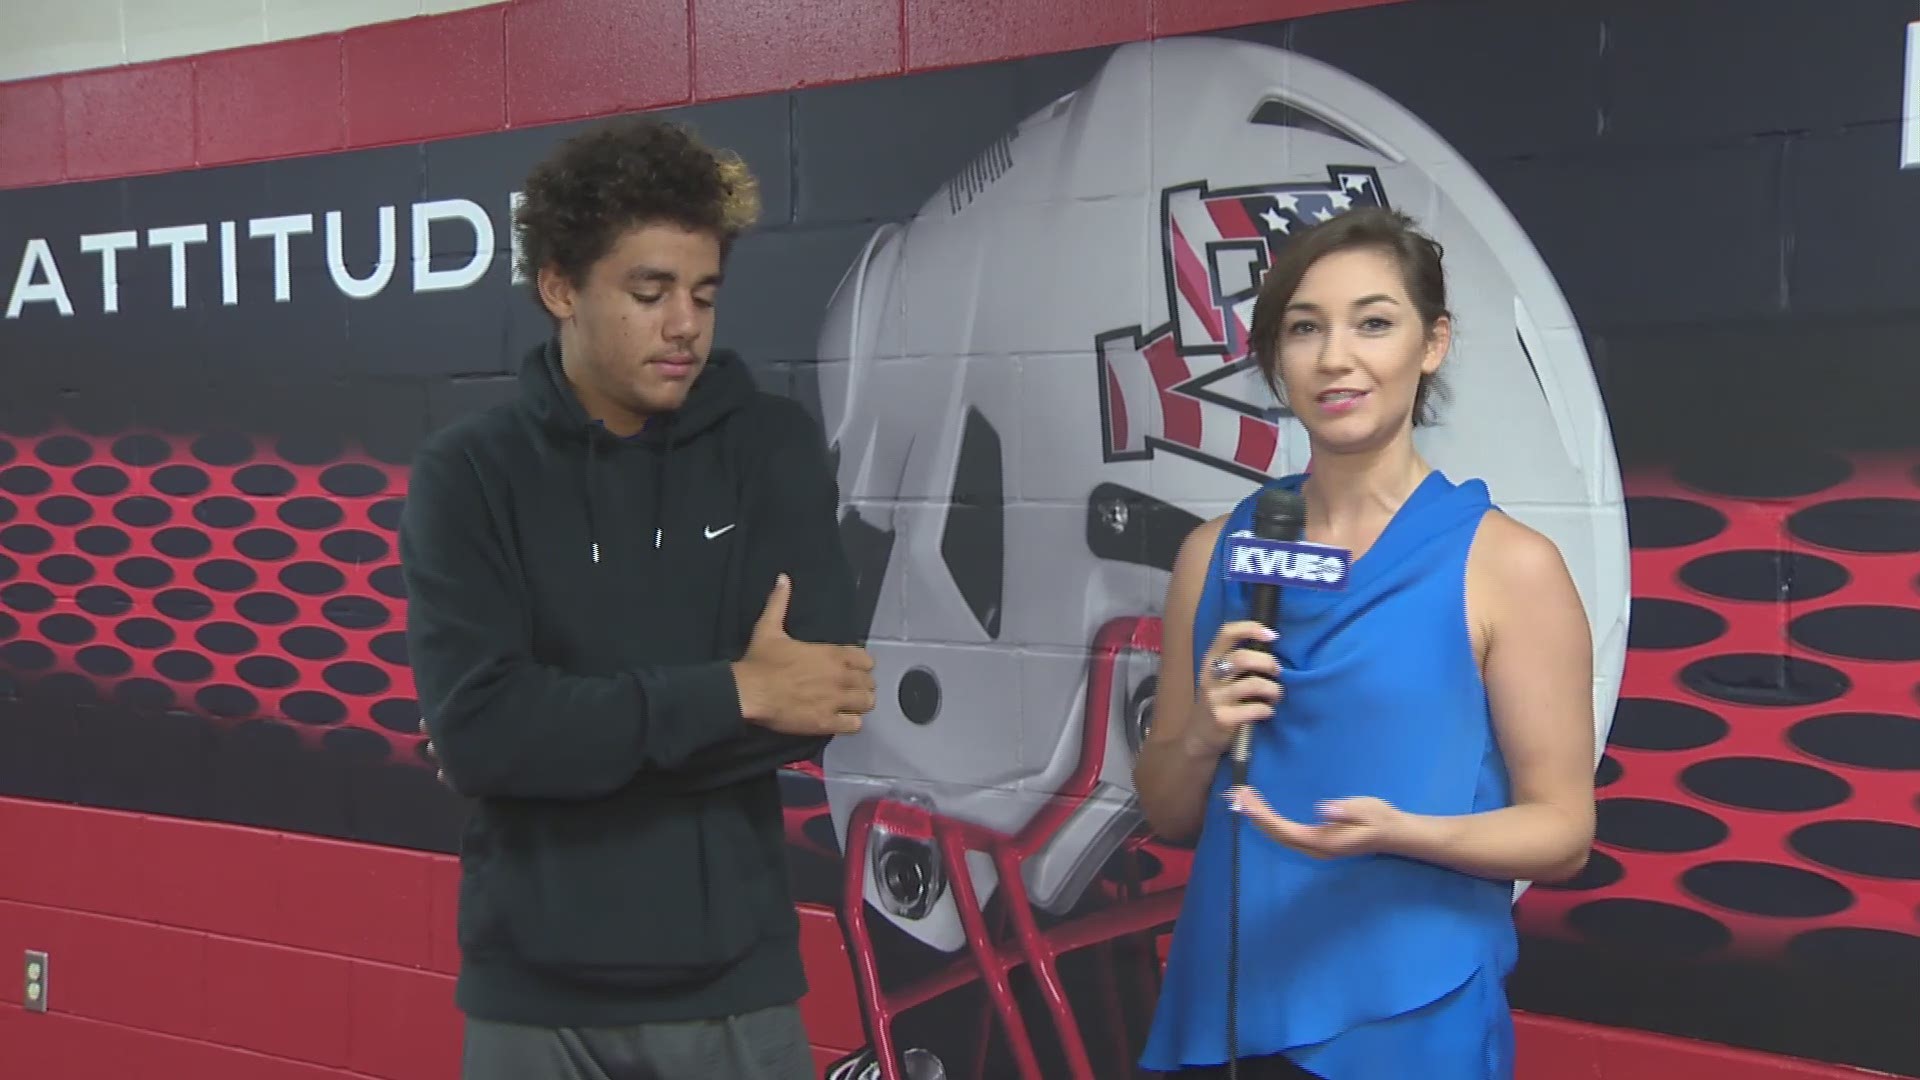 East View football star AJ Mays talks with KVUE's Stacy Slayden about the upcoming season